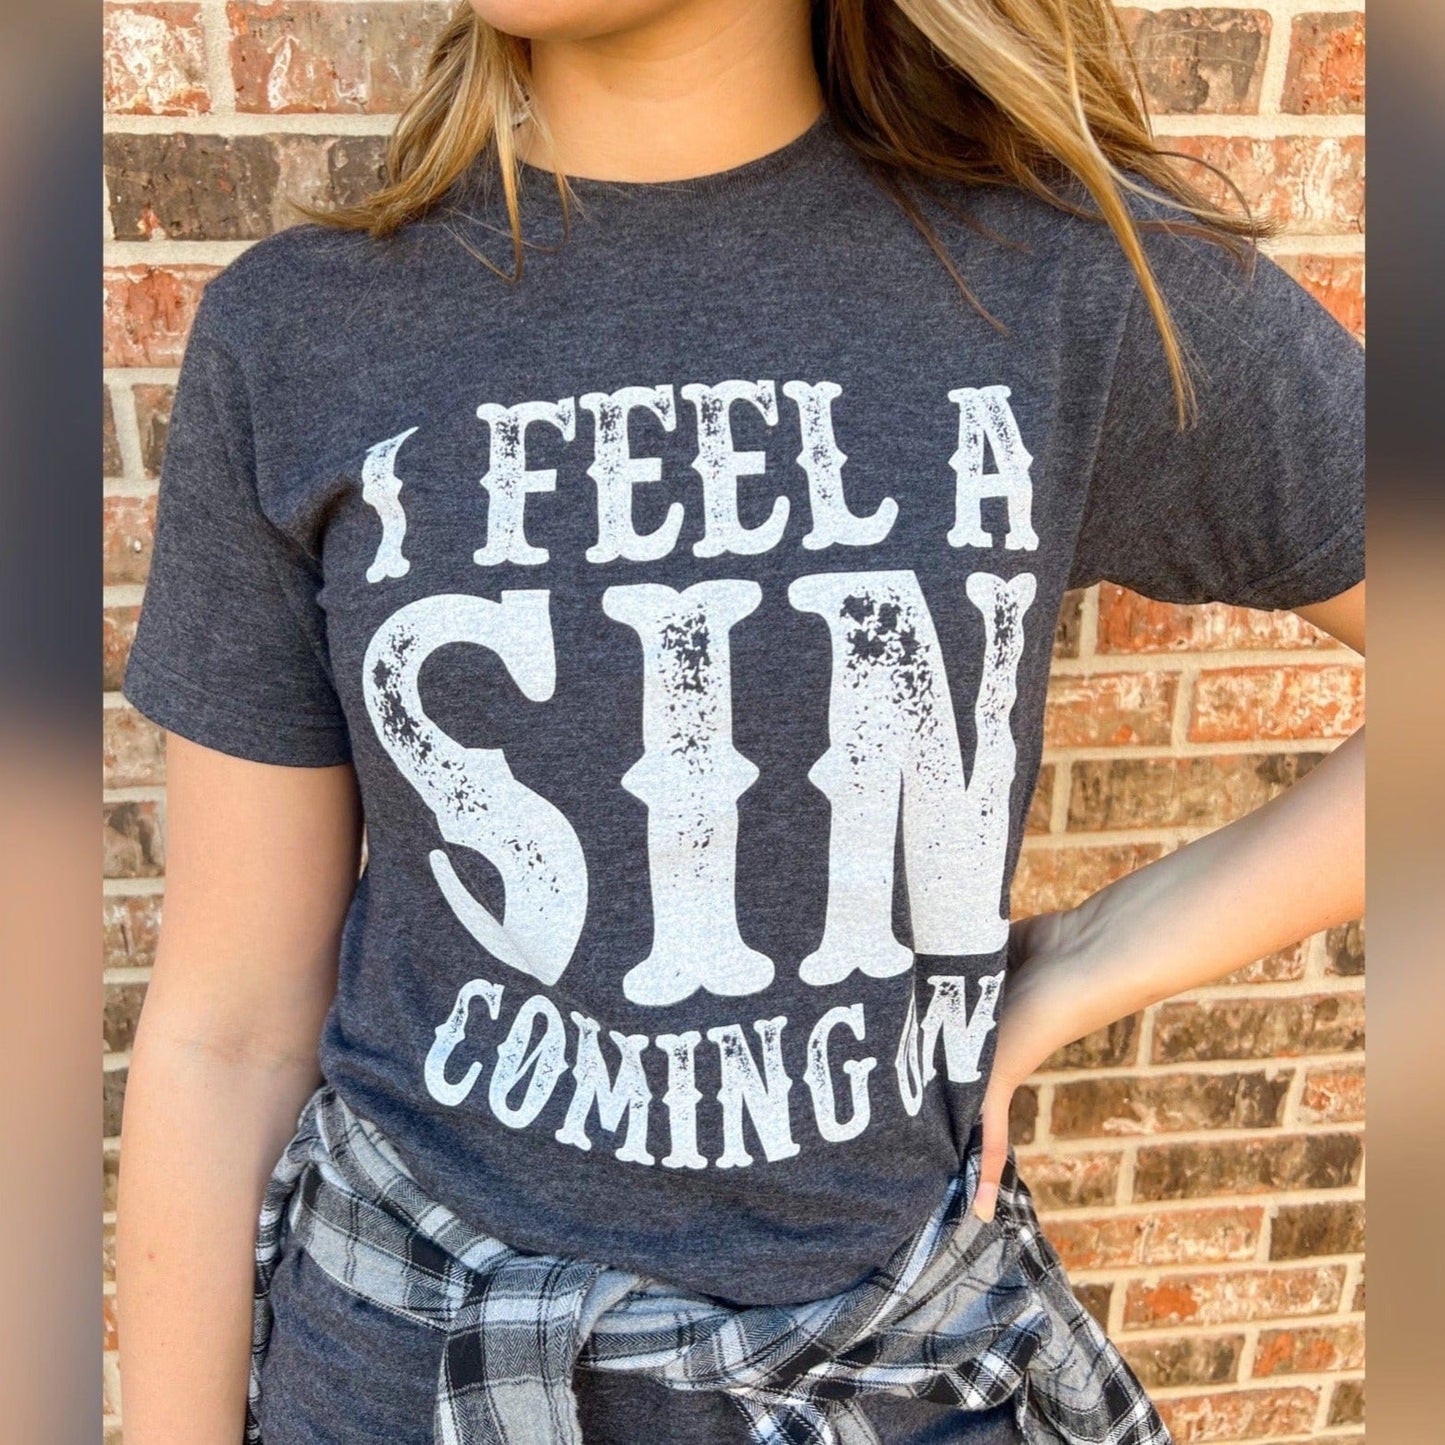 Envy Stylz Boutique Women - Apparel - Shirts - T-Shirts I Feel A Sin Coming On Soft Graphic Tee